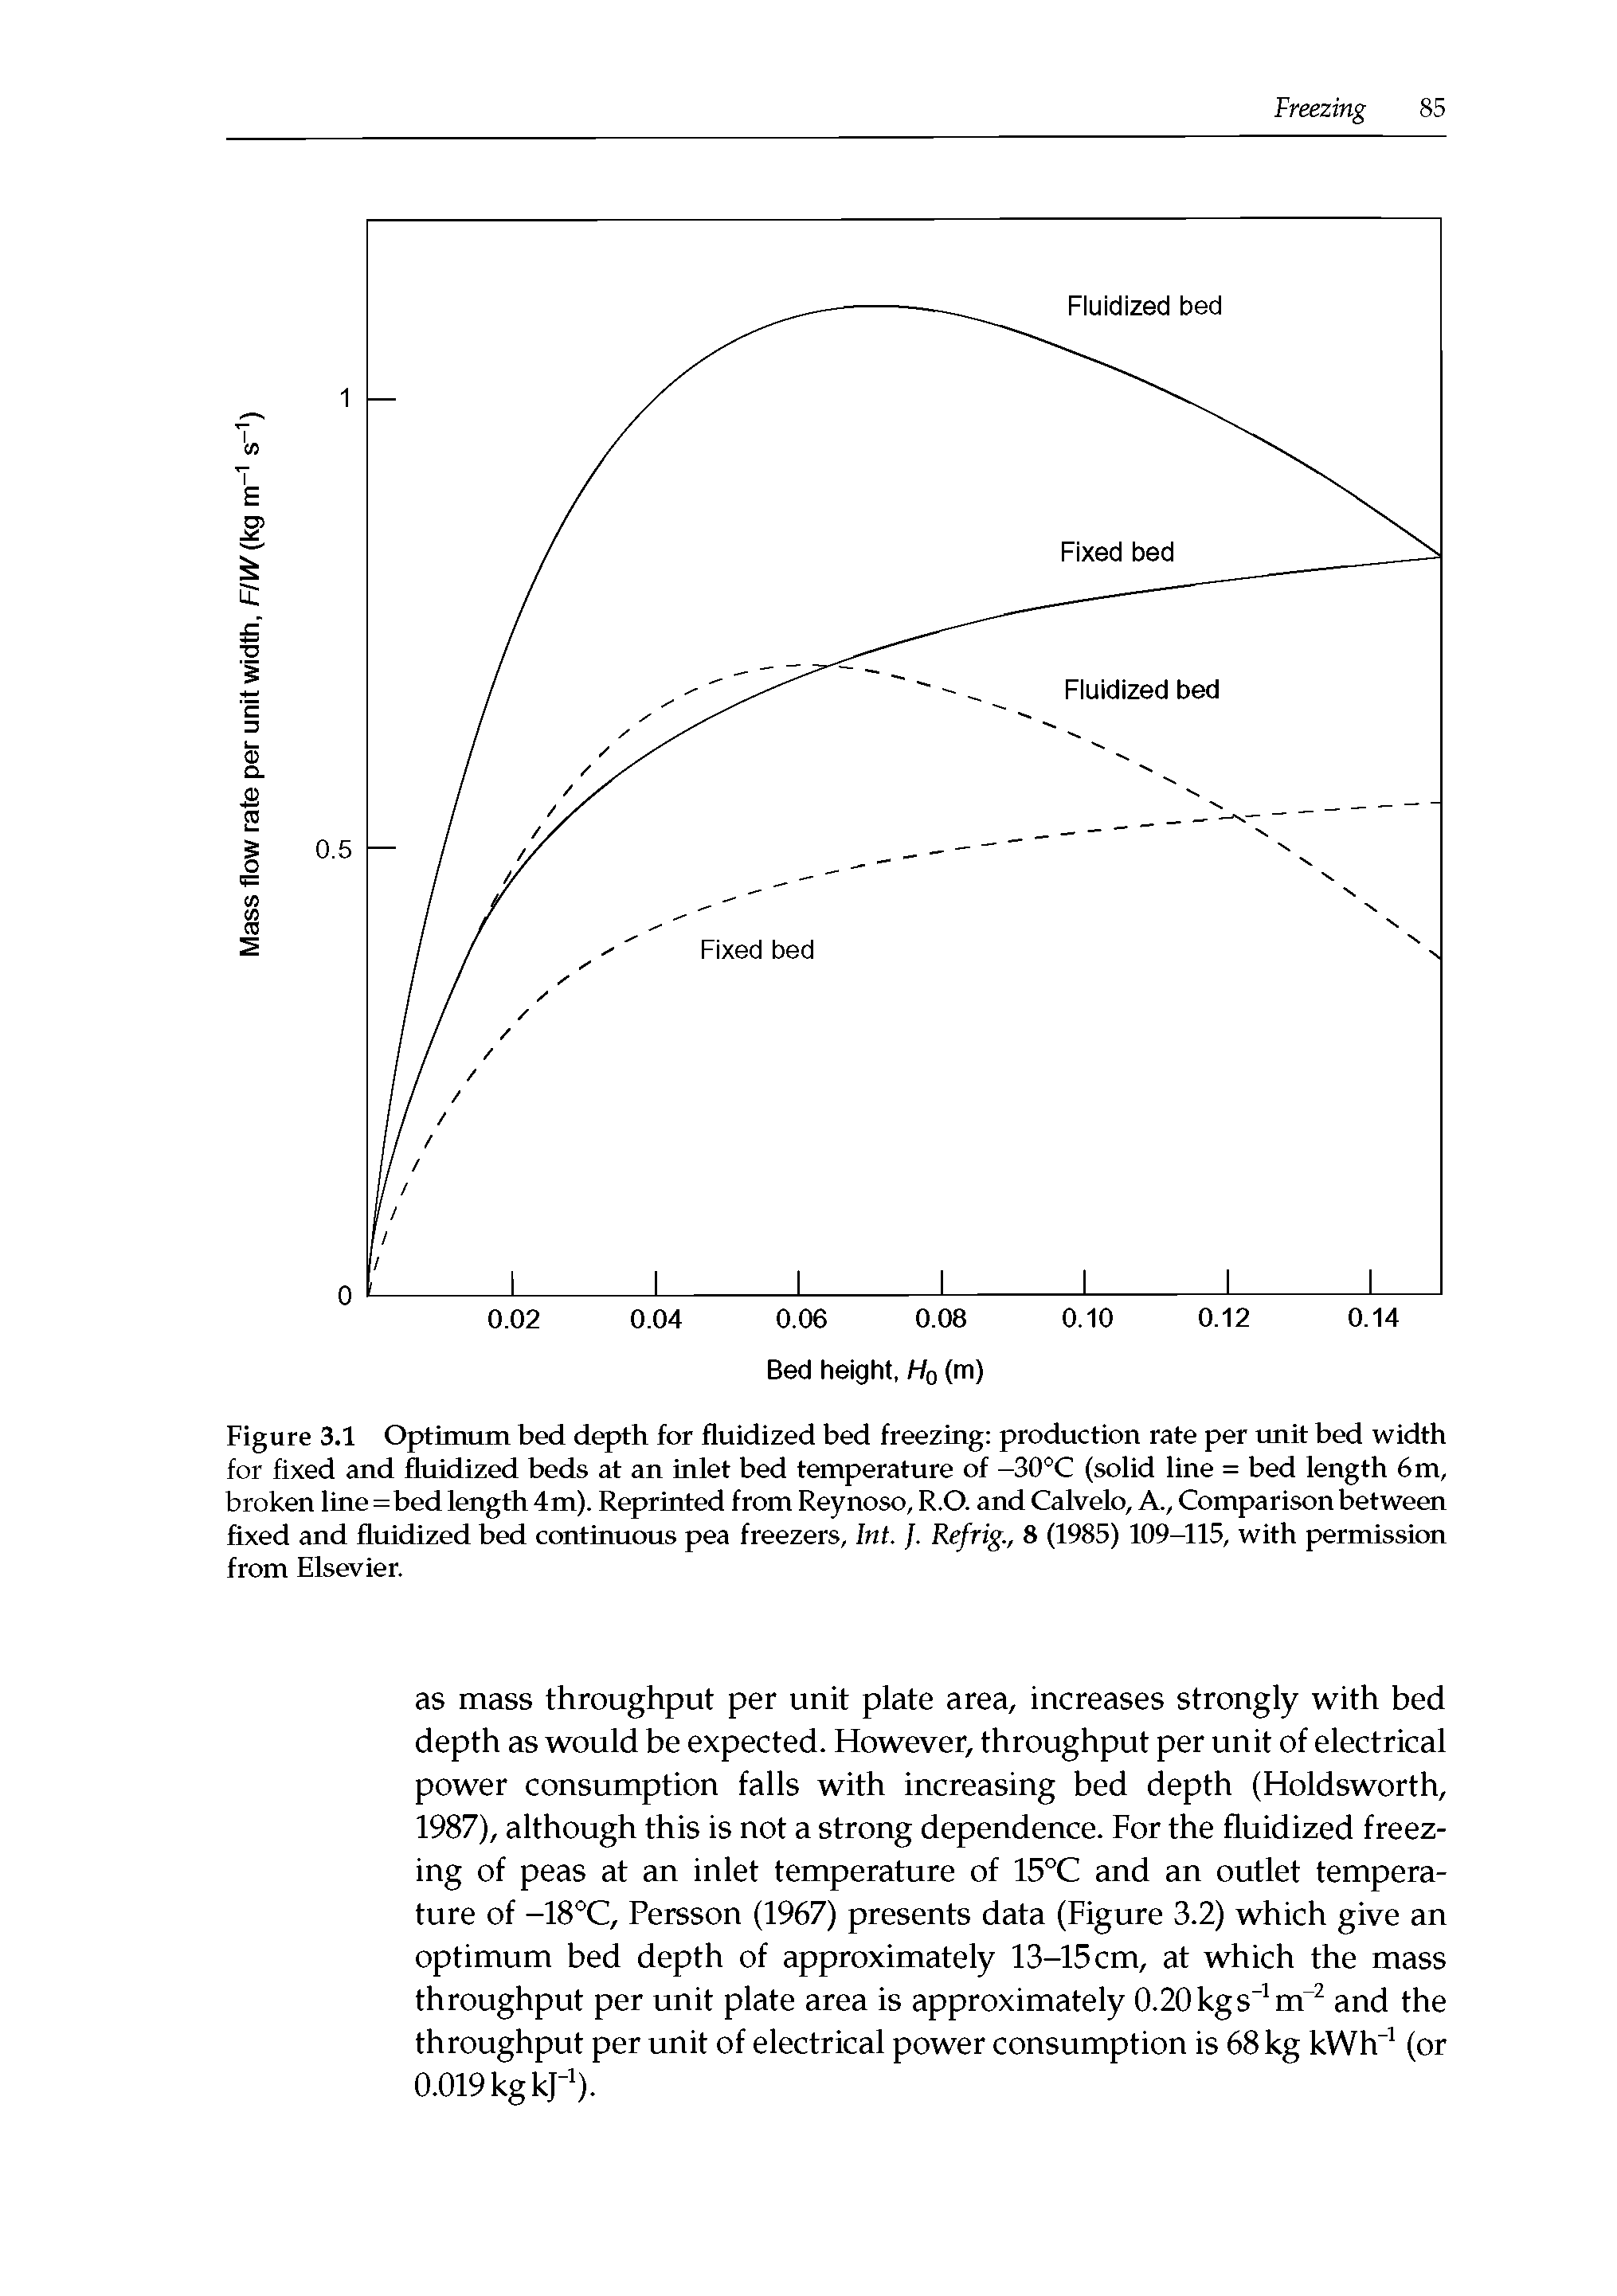 Figure 3.1 Optimum bed depth for fluidized bed freezing production rate per imit bed width for fixed and fluidized beds at an inlet bed temperature of -30°C (solid line = bed length 6 m, broken line=bed length 4m). Reprinted from Reynoso, R.O. and Calvelo, A., Comparison between fixed and fluidized bed continuous pea freezers, Int.. Refrig., 8 (1985) 109-115, with permission from Elsevier.